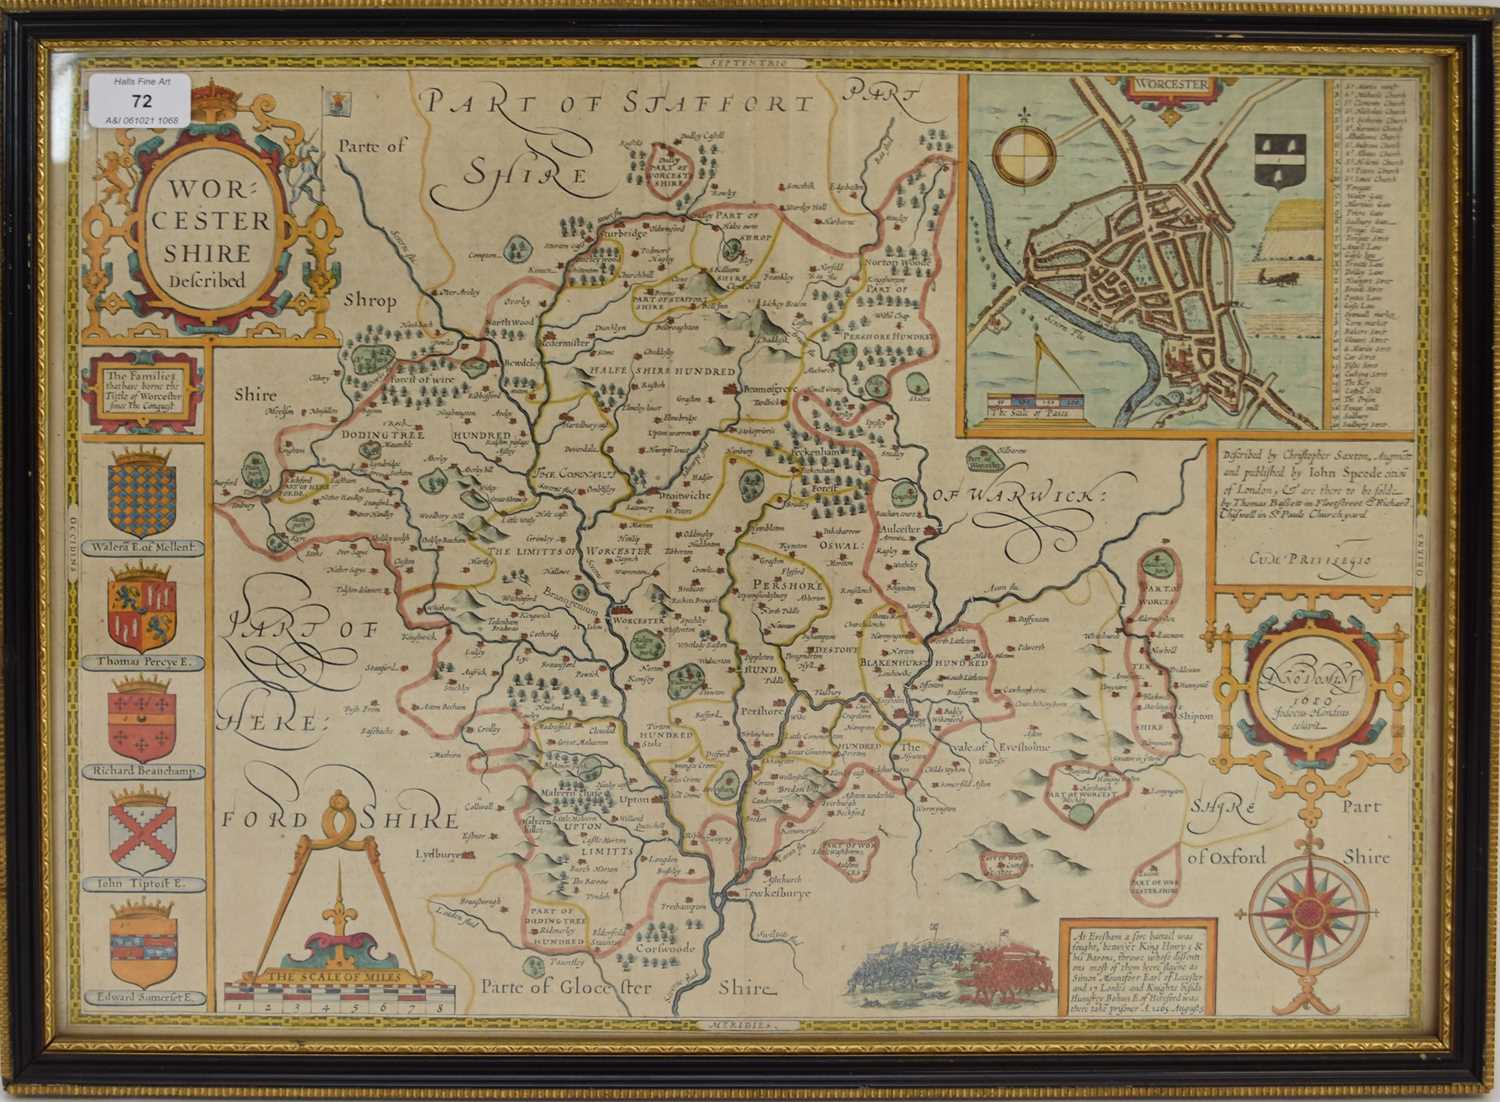 Lot 72 - SPEED, John, Map of Worcestershire